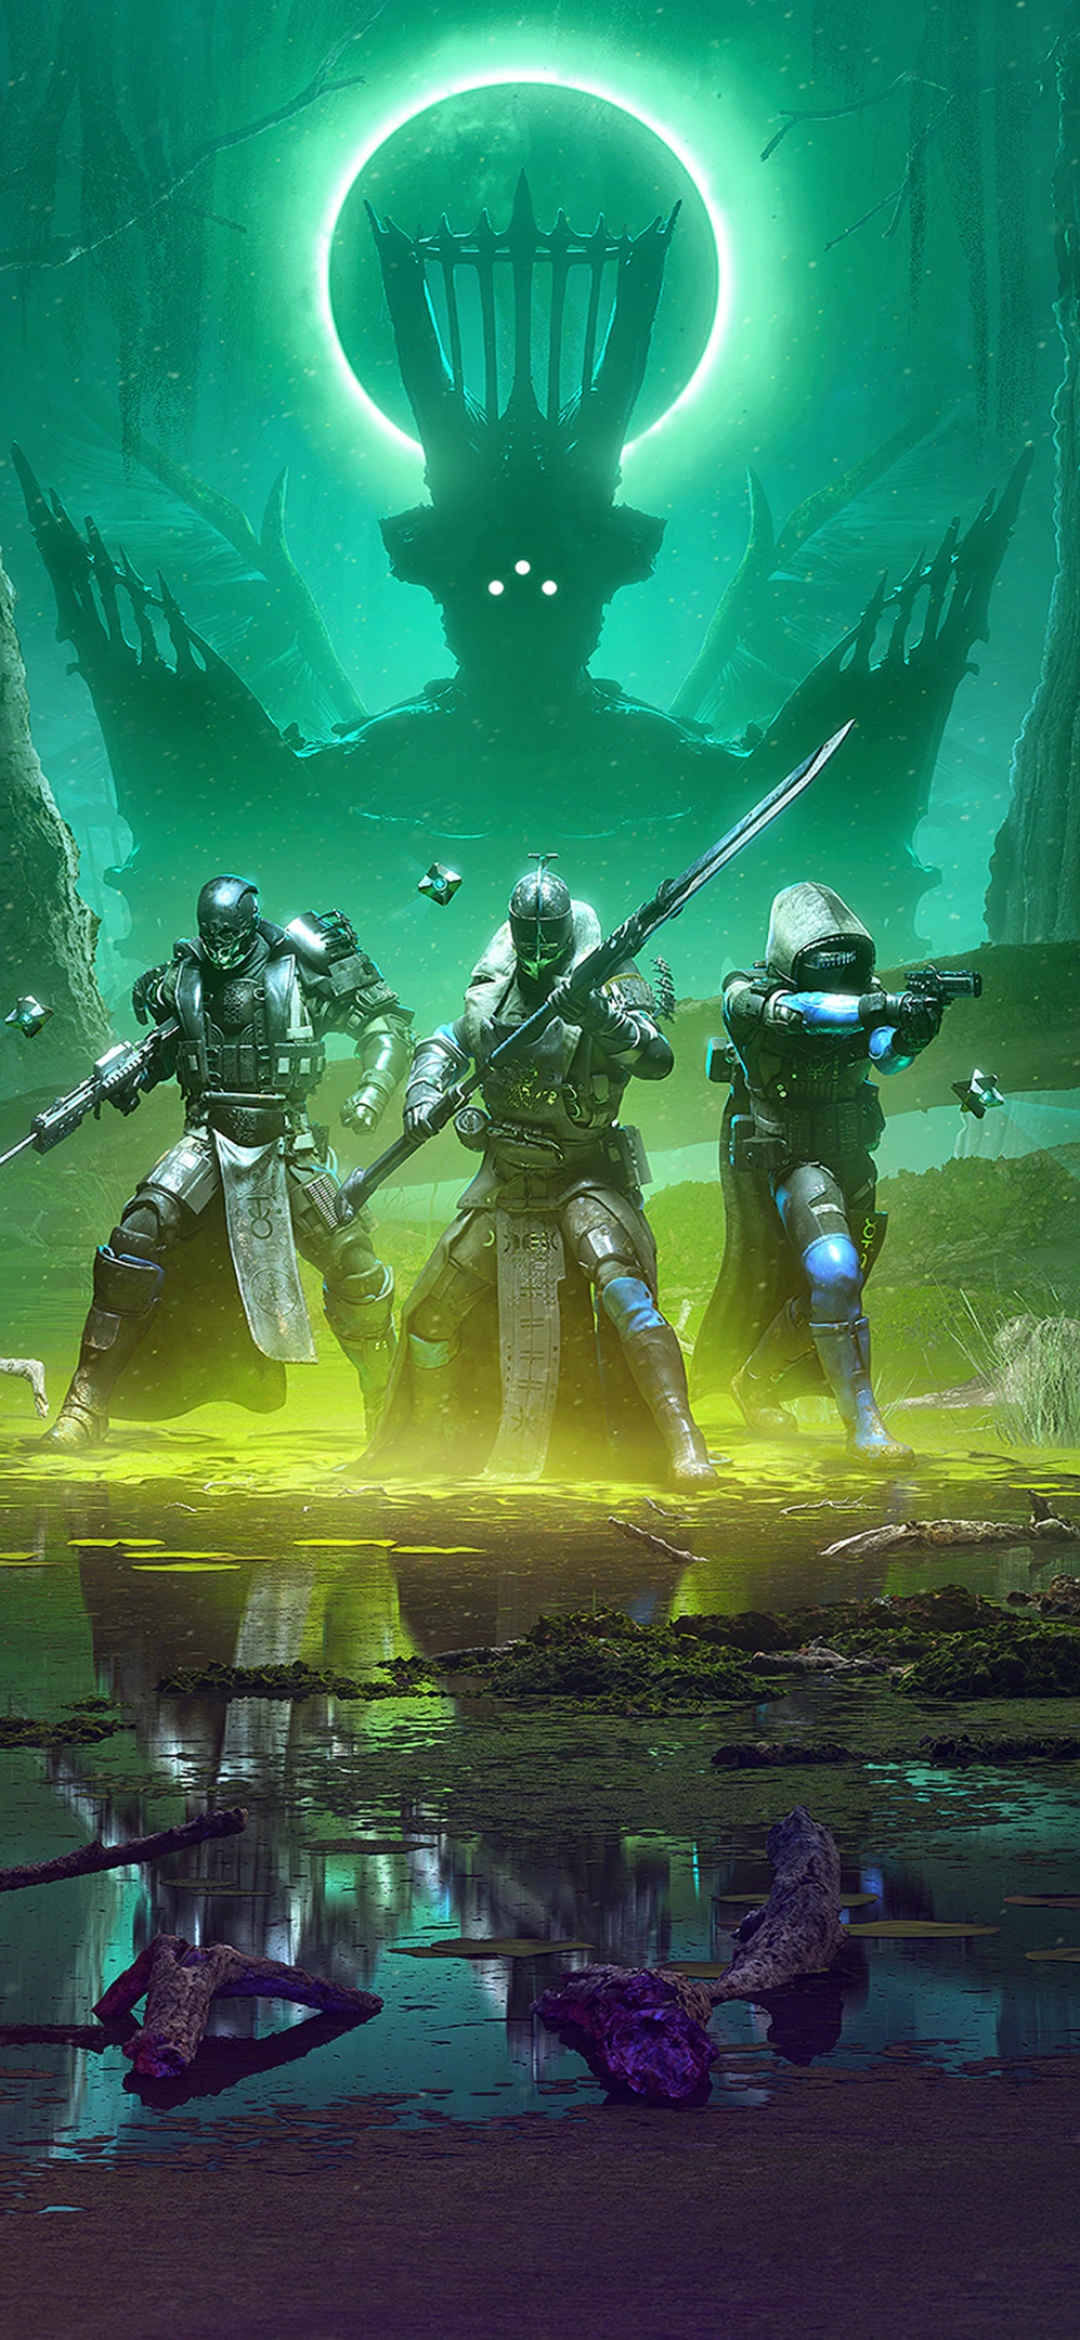 Destiny 2: The Witch Queen Wallpaper 4K, Bungie, 2022 Games, Games, #6343